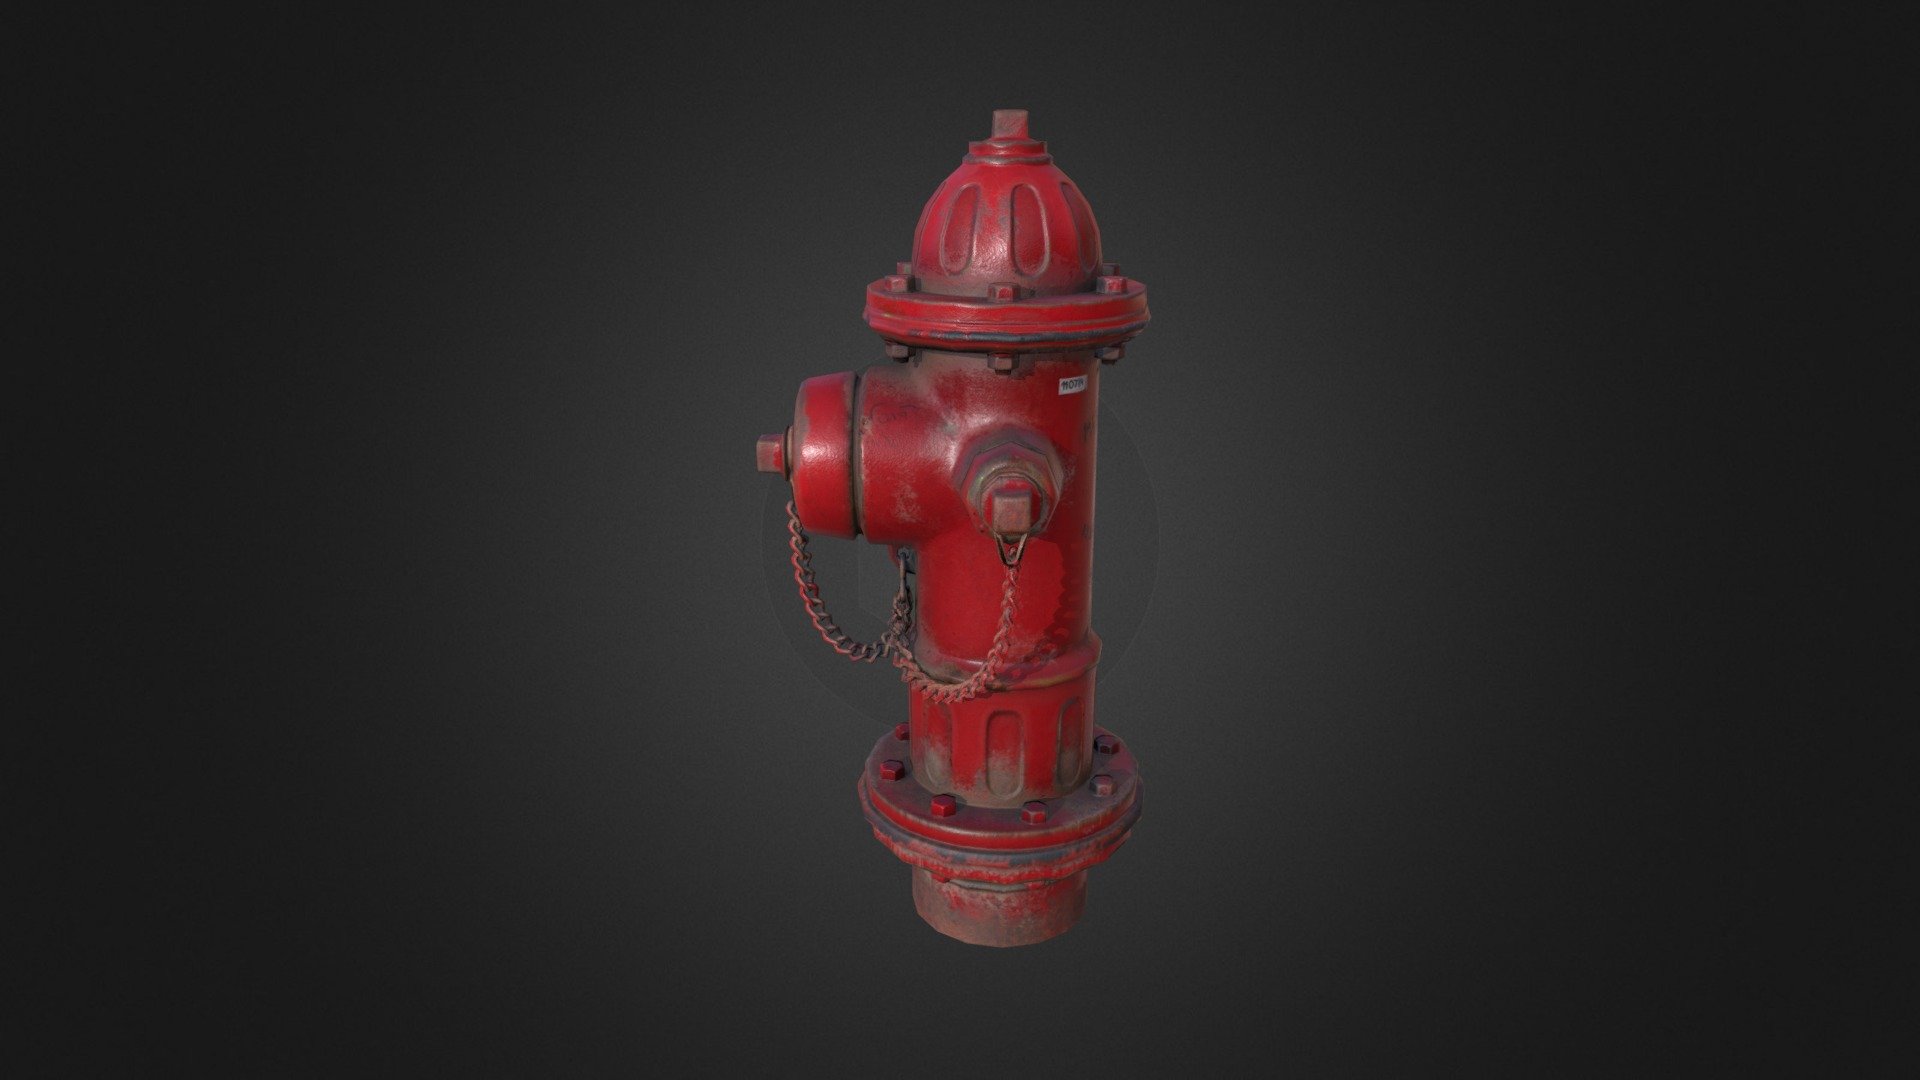 Blender is awesome! My personal project for practice and stay fit in 3D 
Feedback &amp; critics are always welcome! Thanks 
If you like it - u can buy it - https://www.artstation.com/dokart/store/9nay/fire-hydrant - Fire Hydrant - 3D model by Alex Andrusevich (@dokart) 3d model